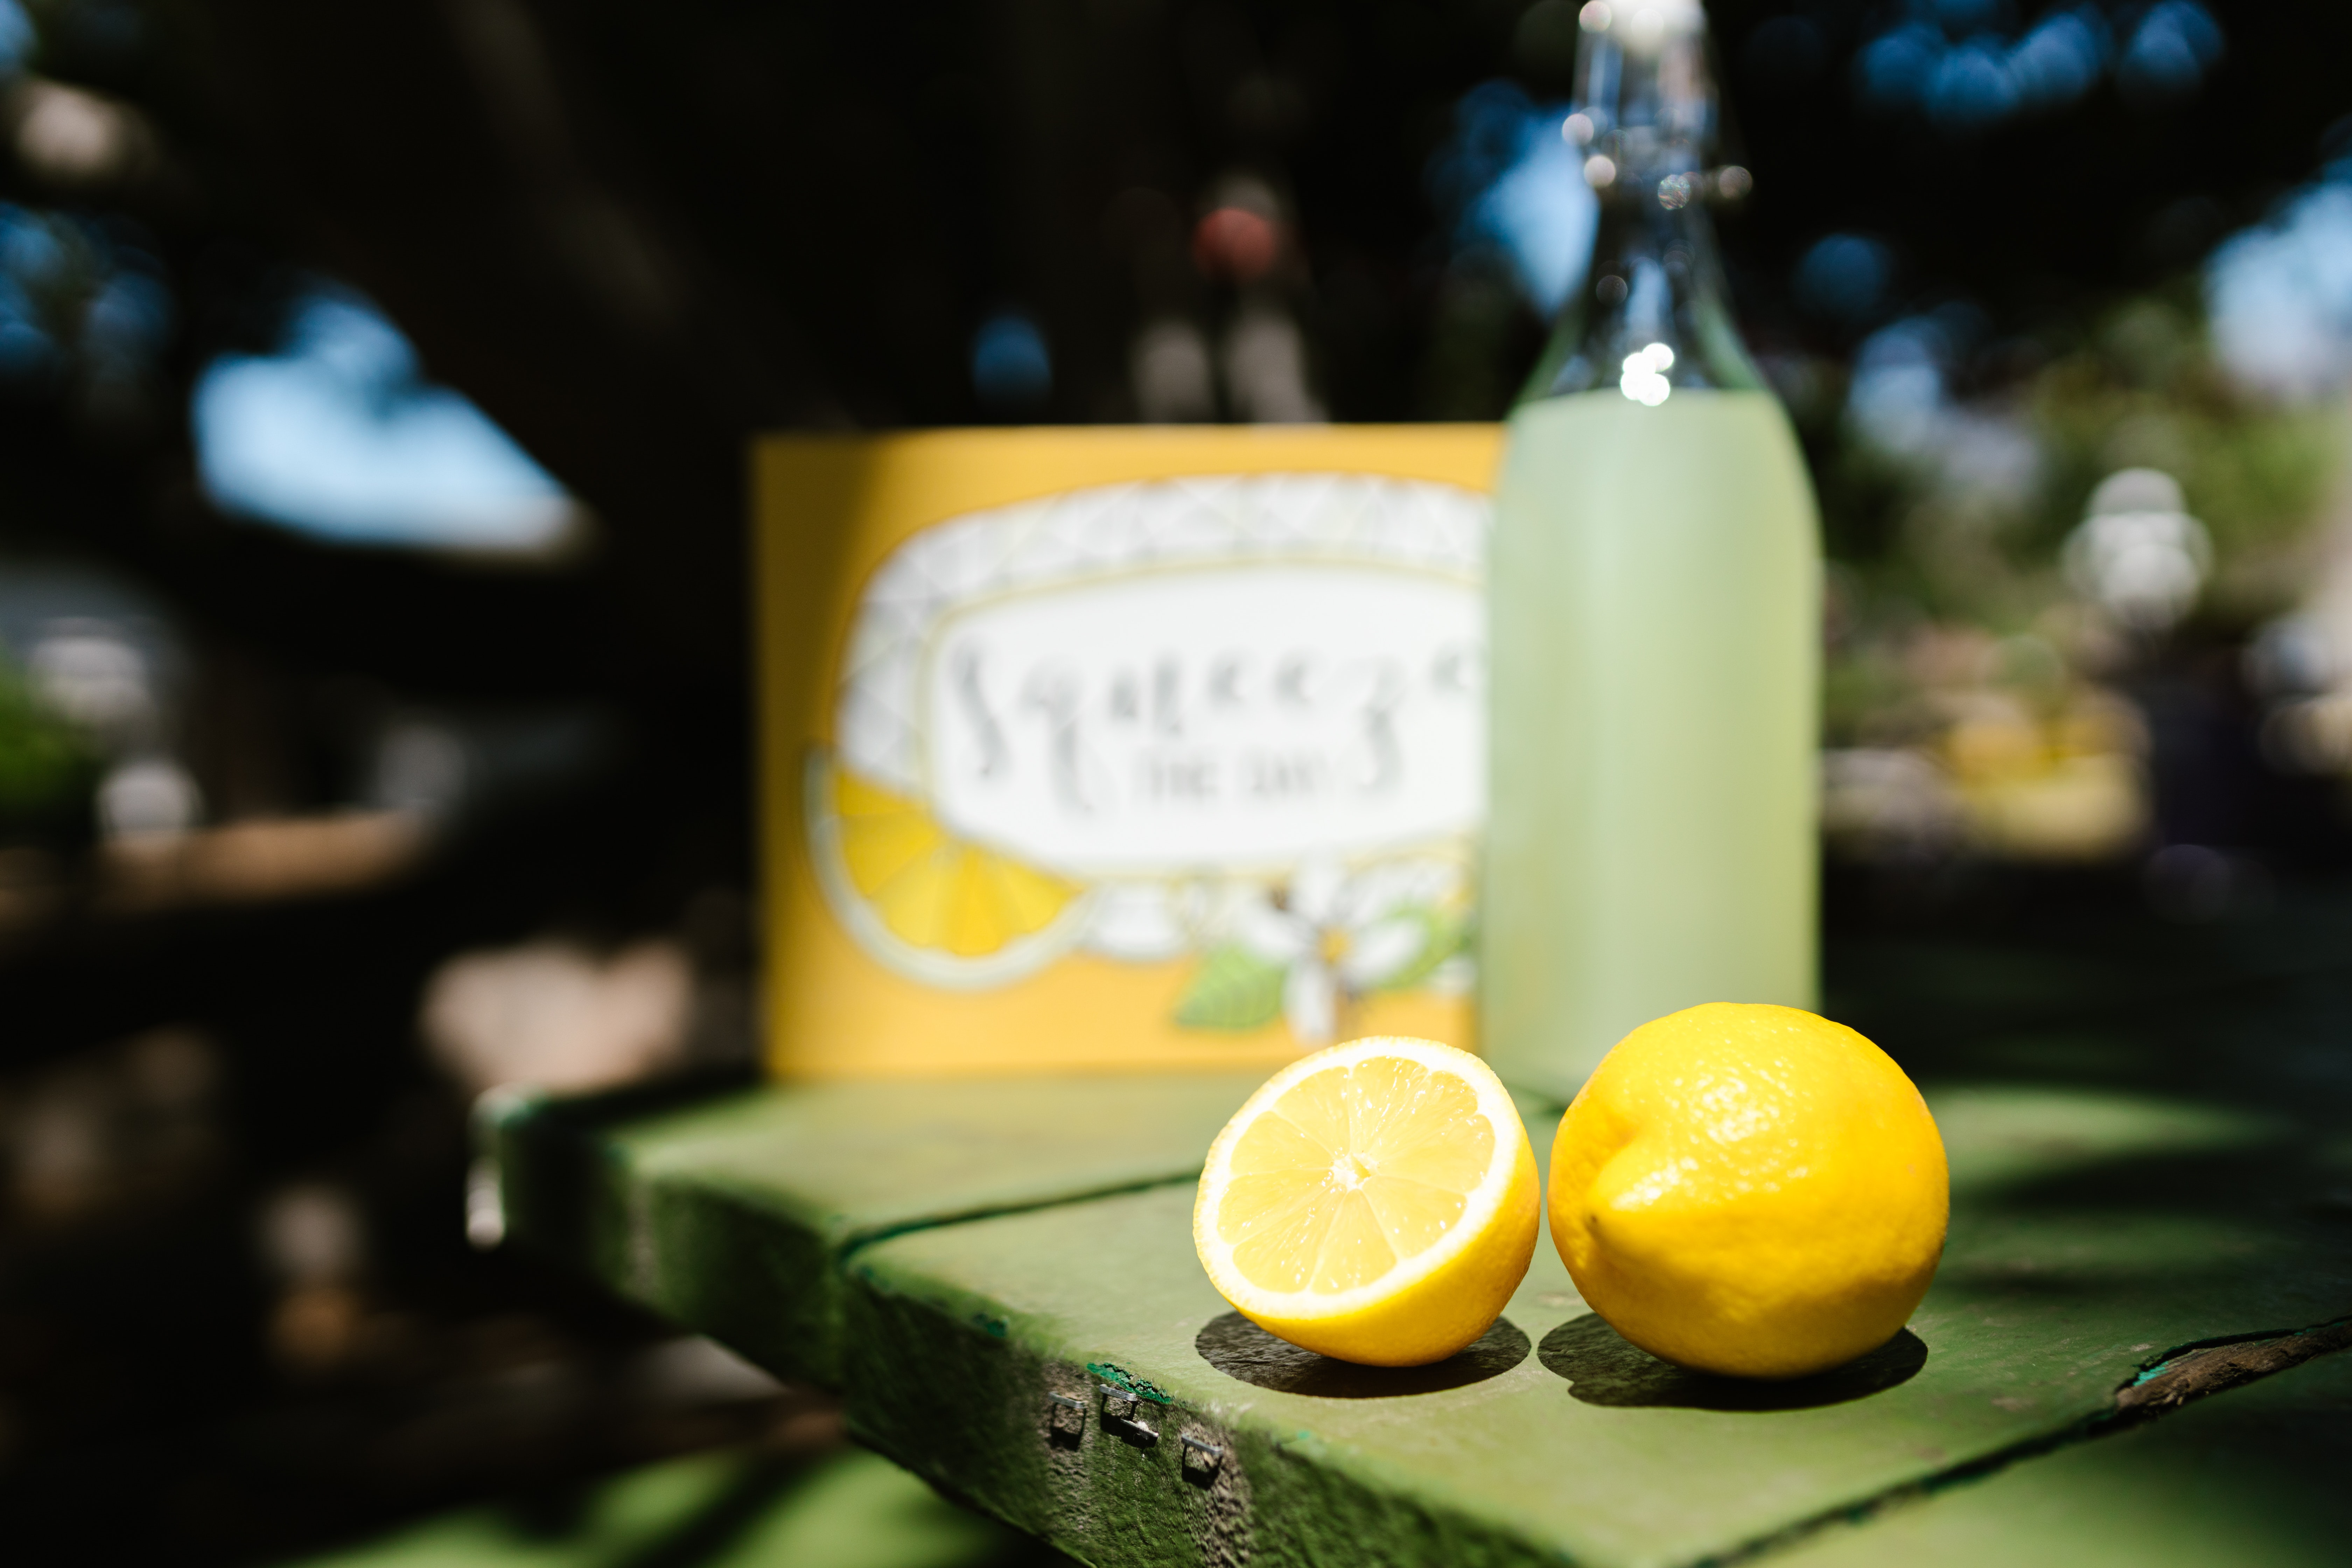 Some lovely homemade lemonade, there are so many benefits to lemons!